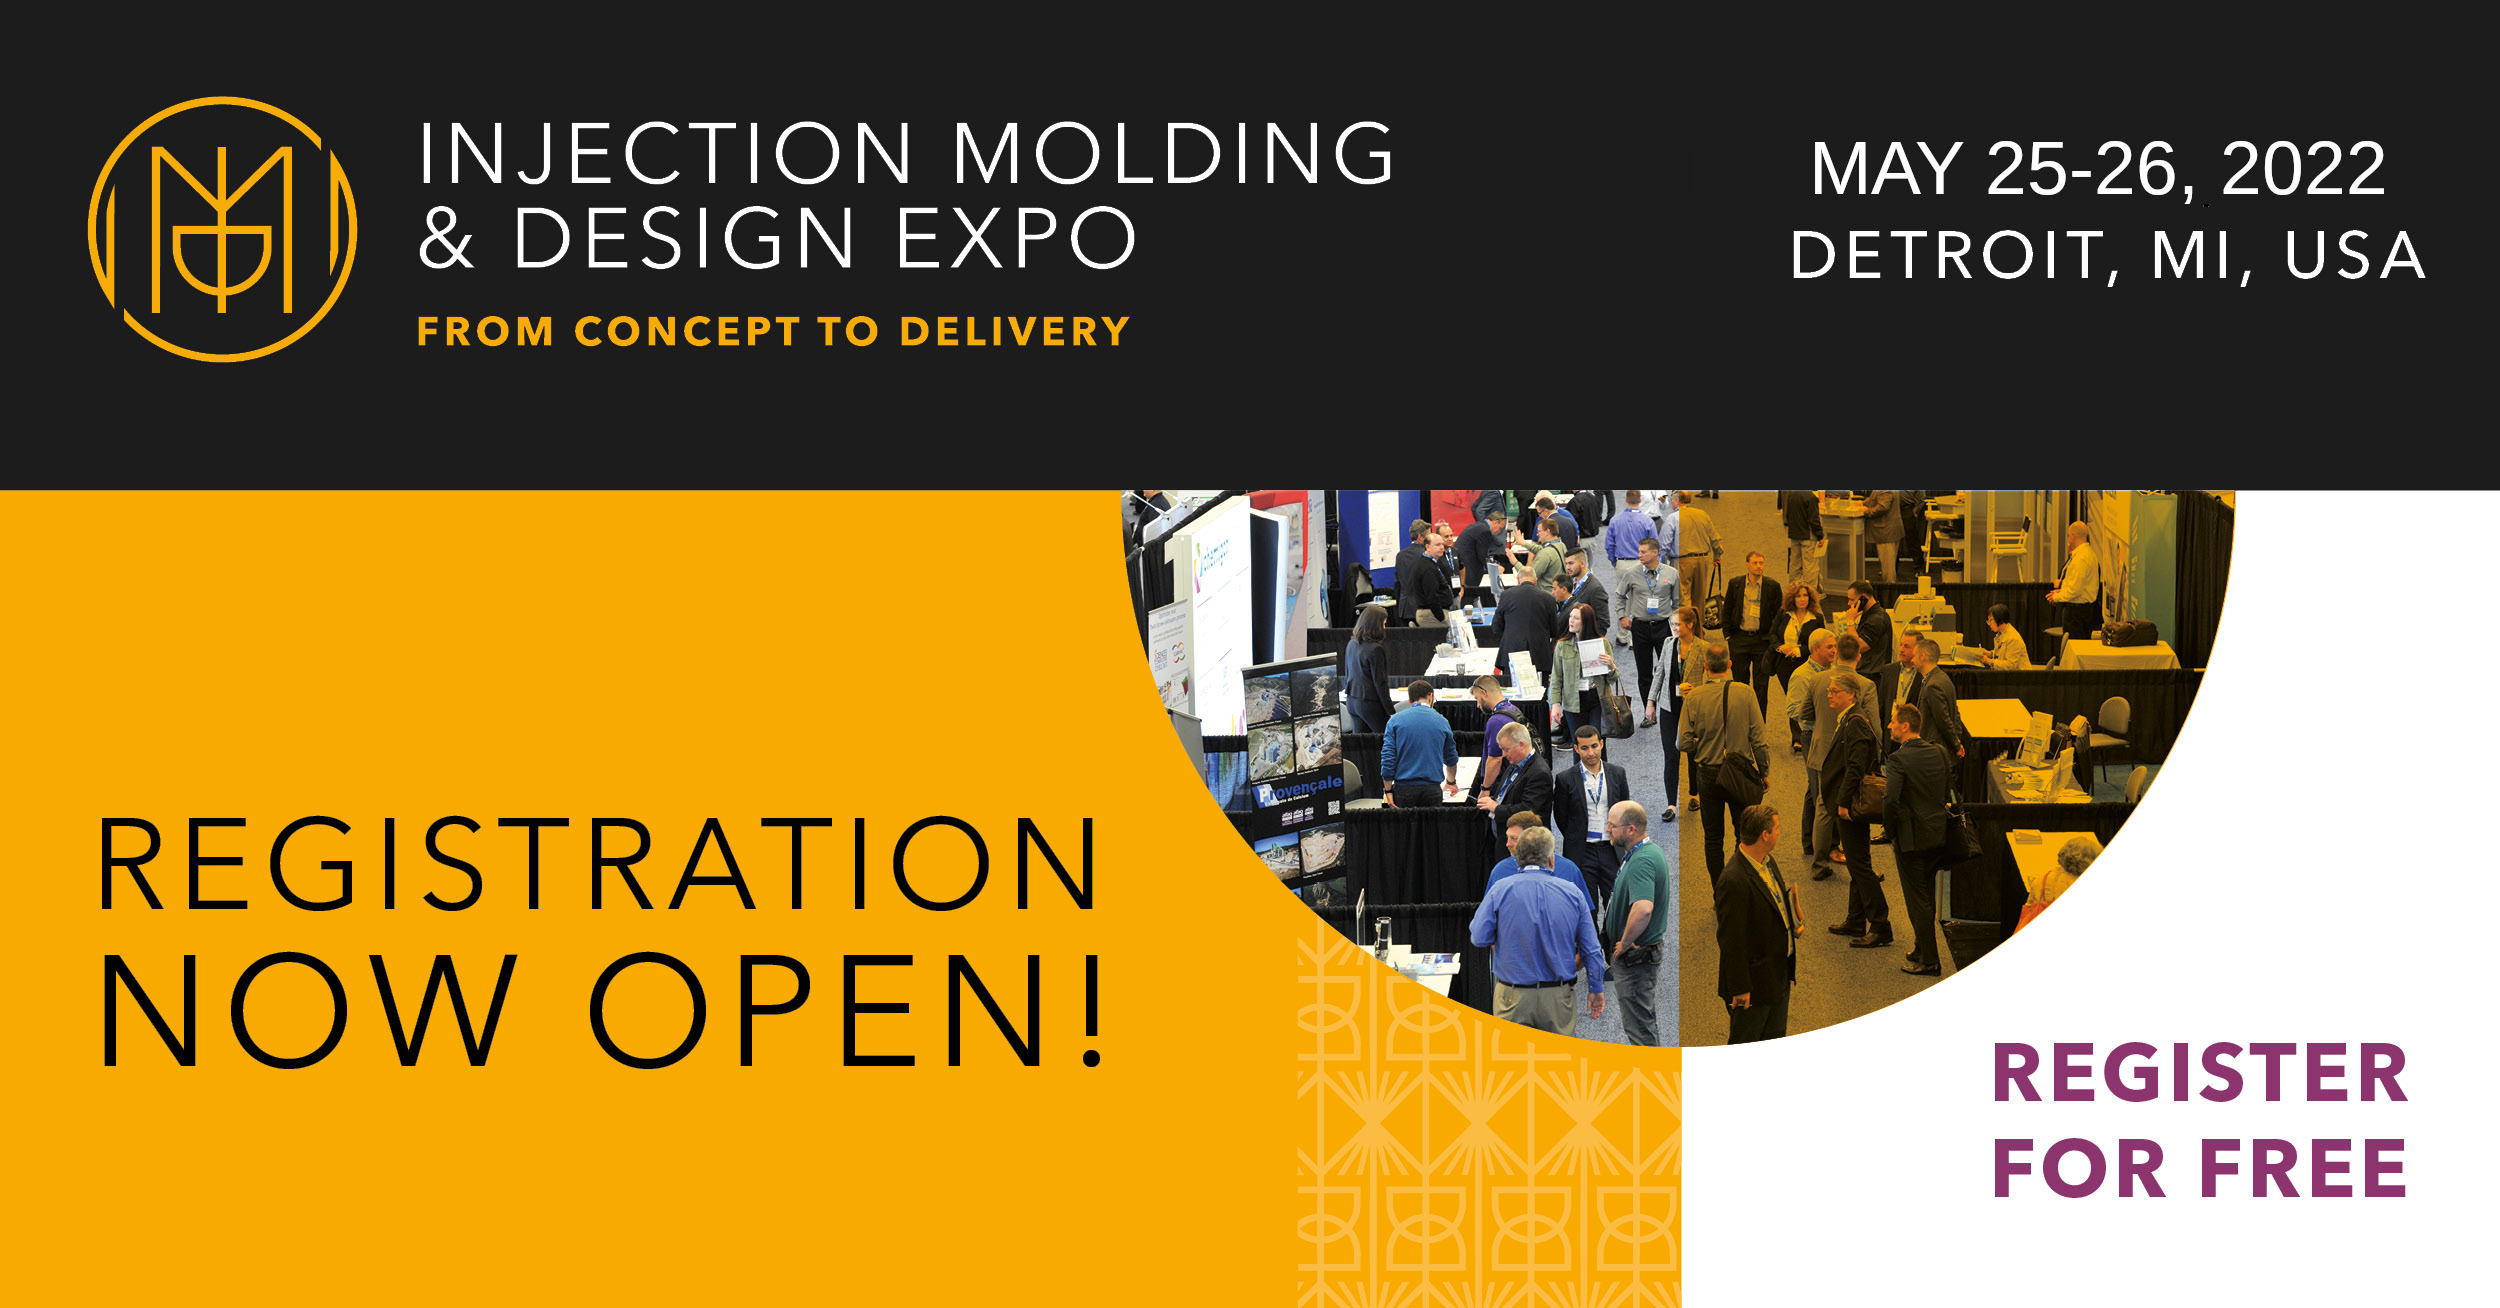 *** INJECTION MOLDING & DESIGN EXPO 2022 ***